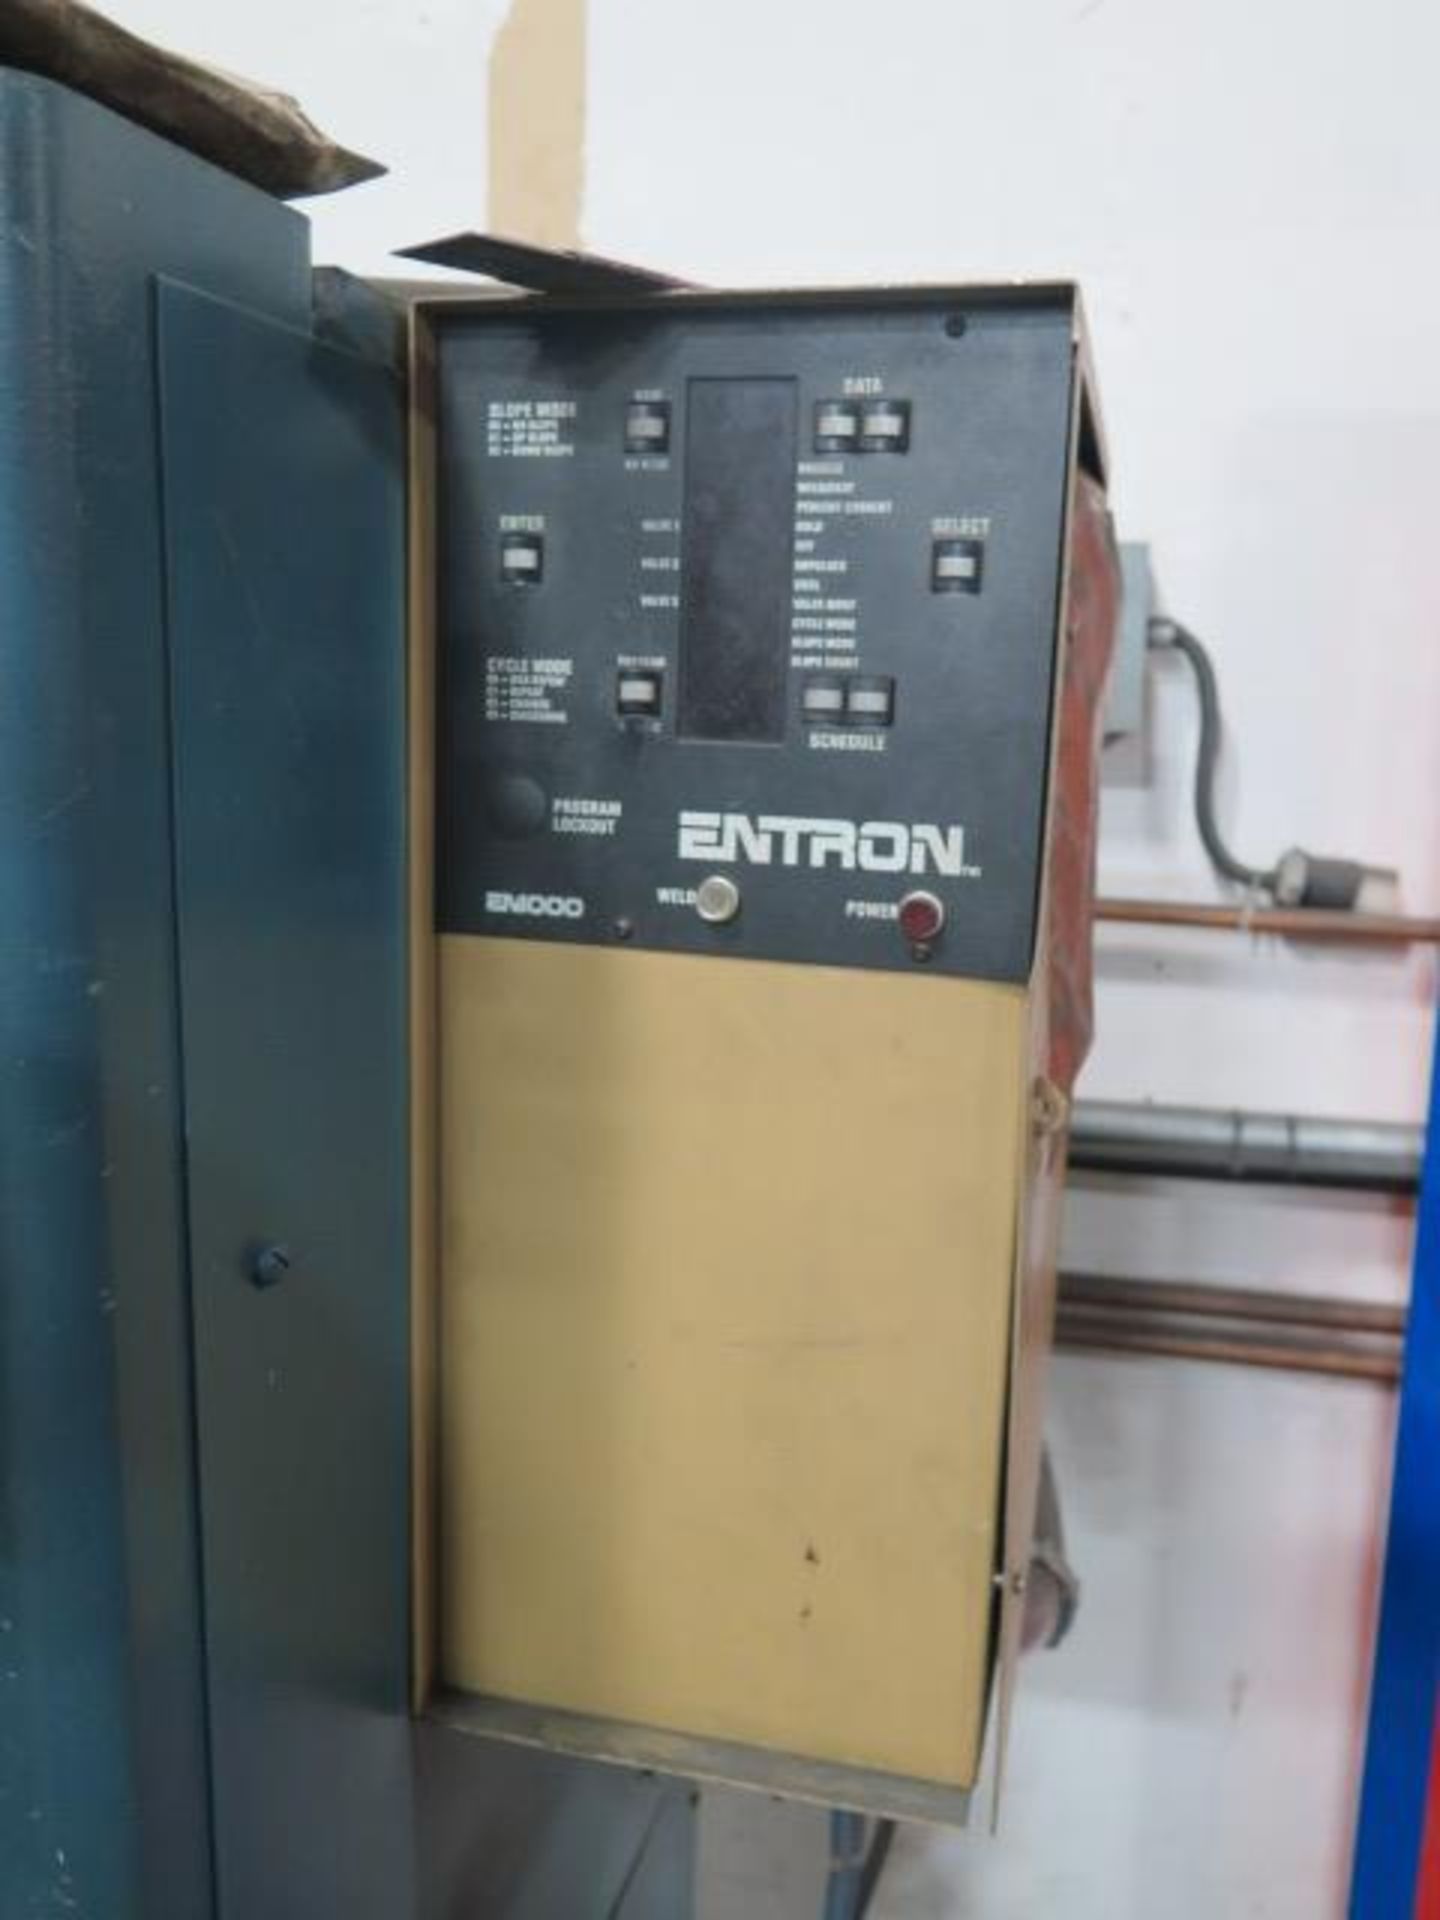 Entron Pneumatic Actuated Spot Welder s/n L-8981 w/ Entron Controls (SOLD AS-IS - NO WARRANTY) - Image 7 of 8